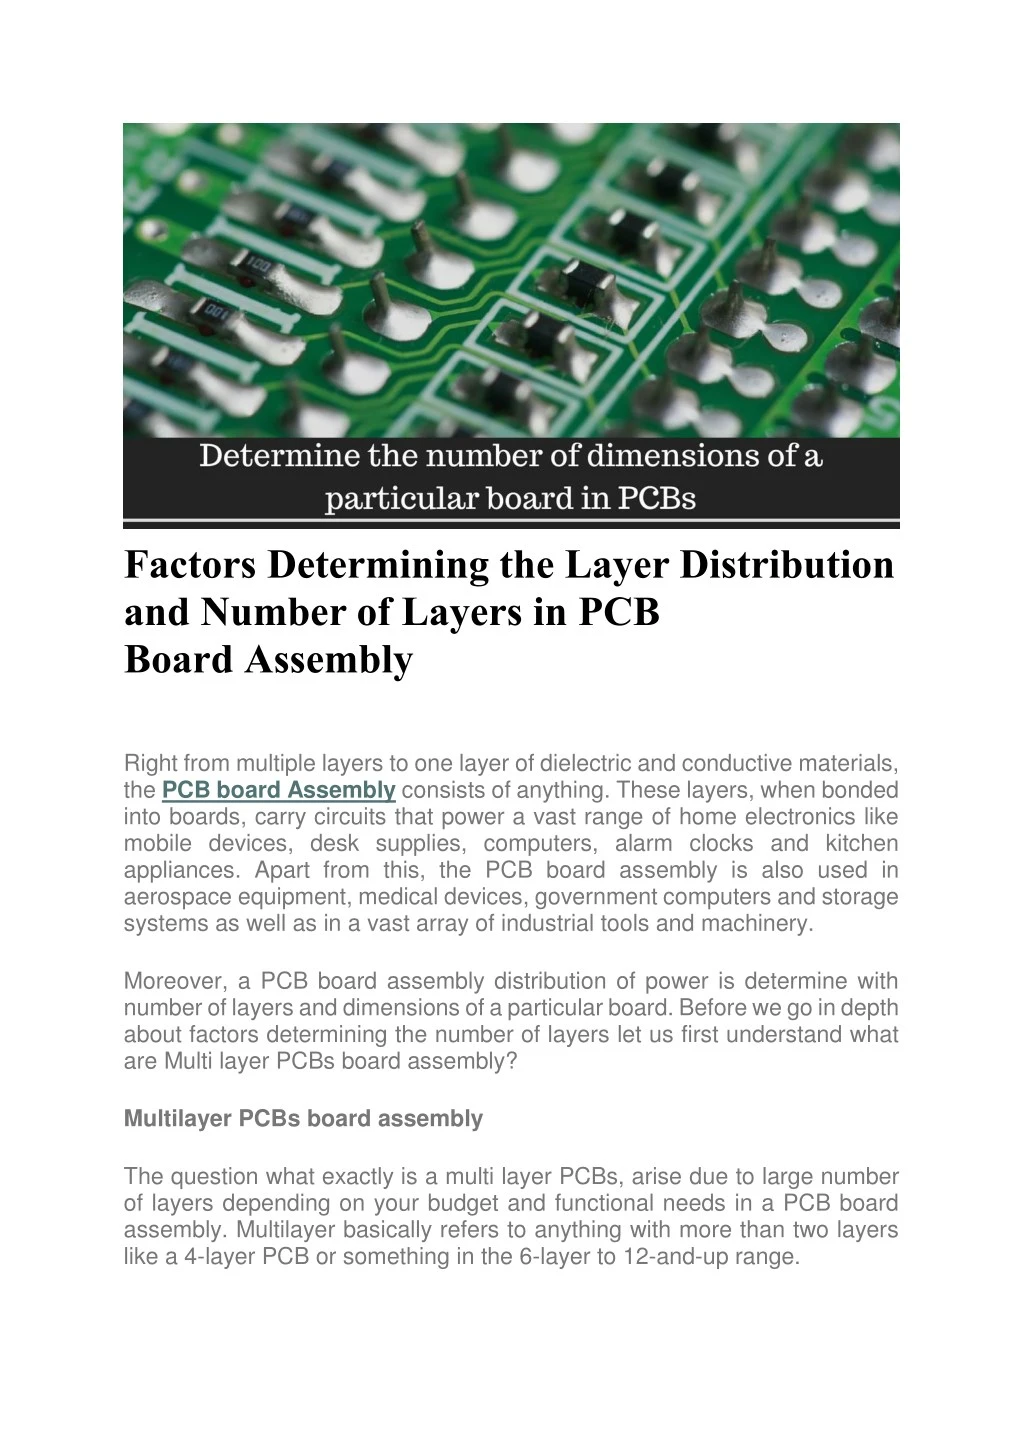 factors determining the layer distribution